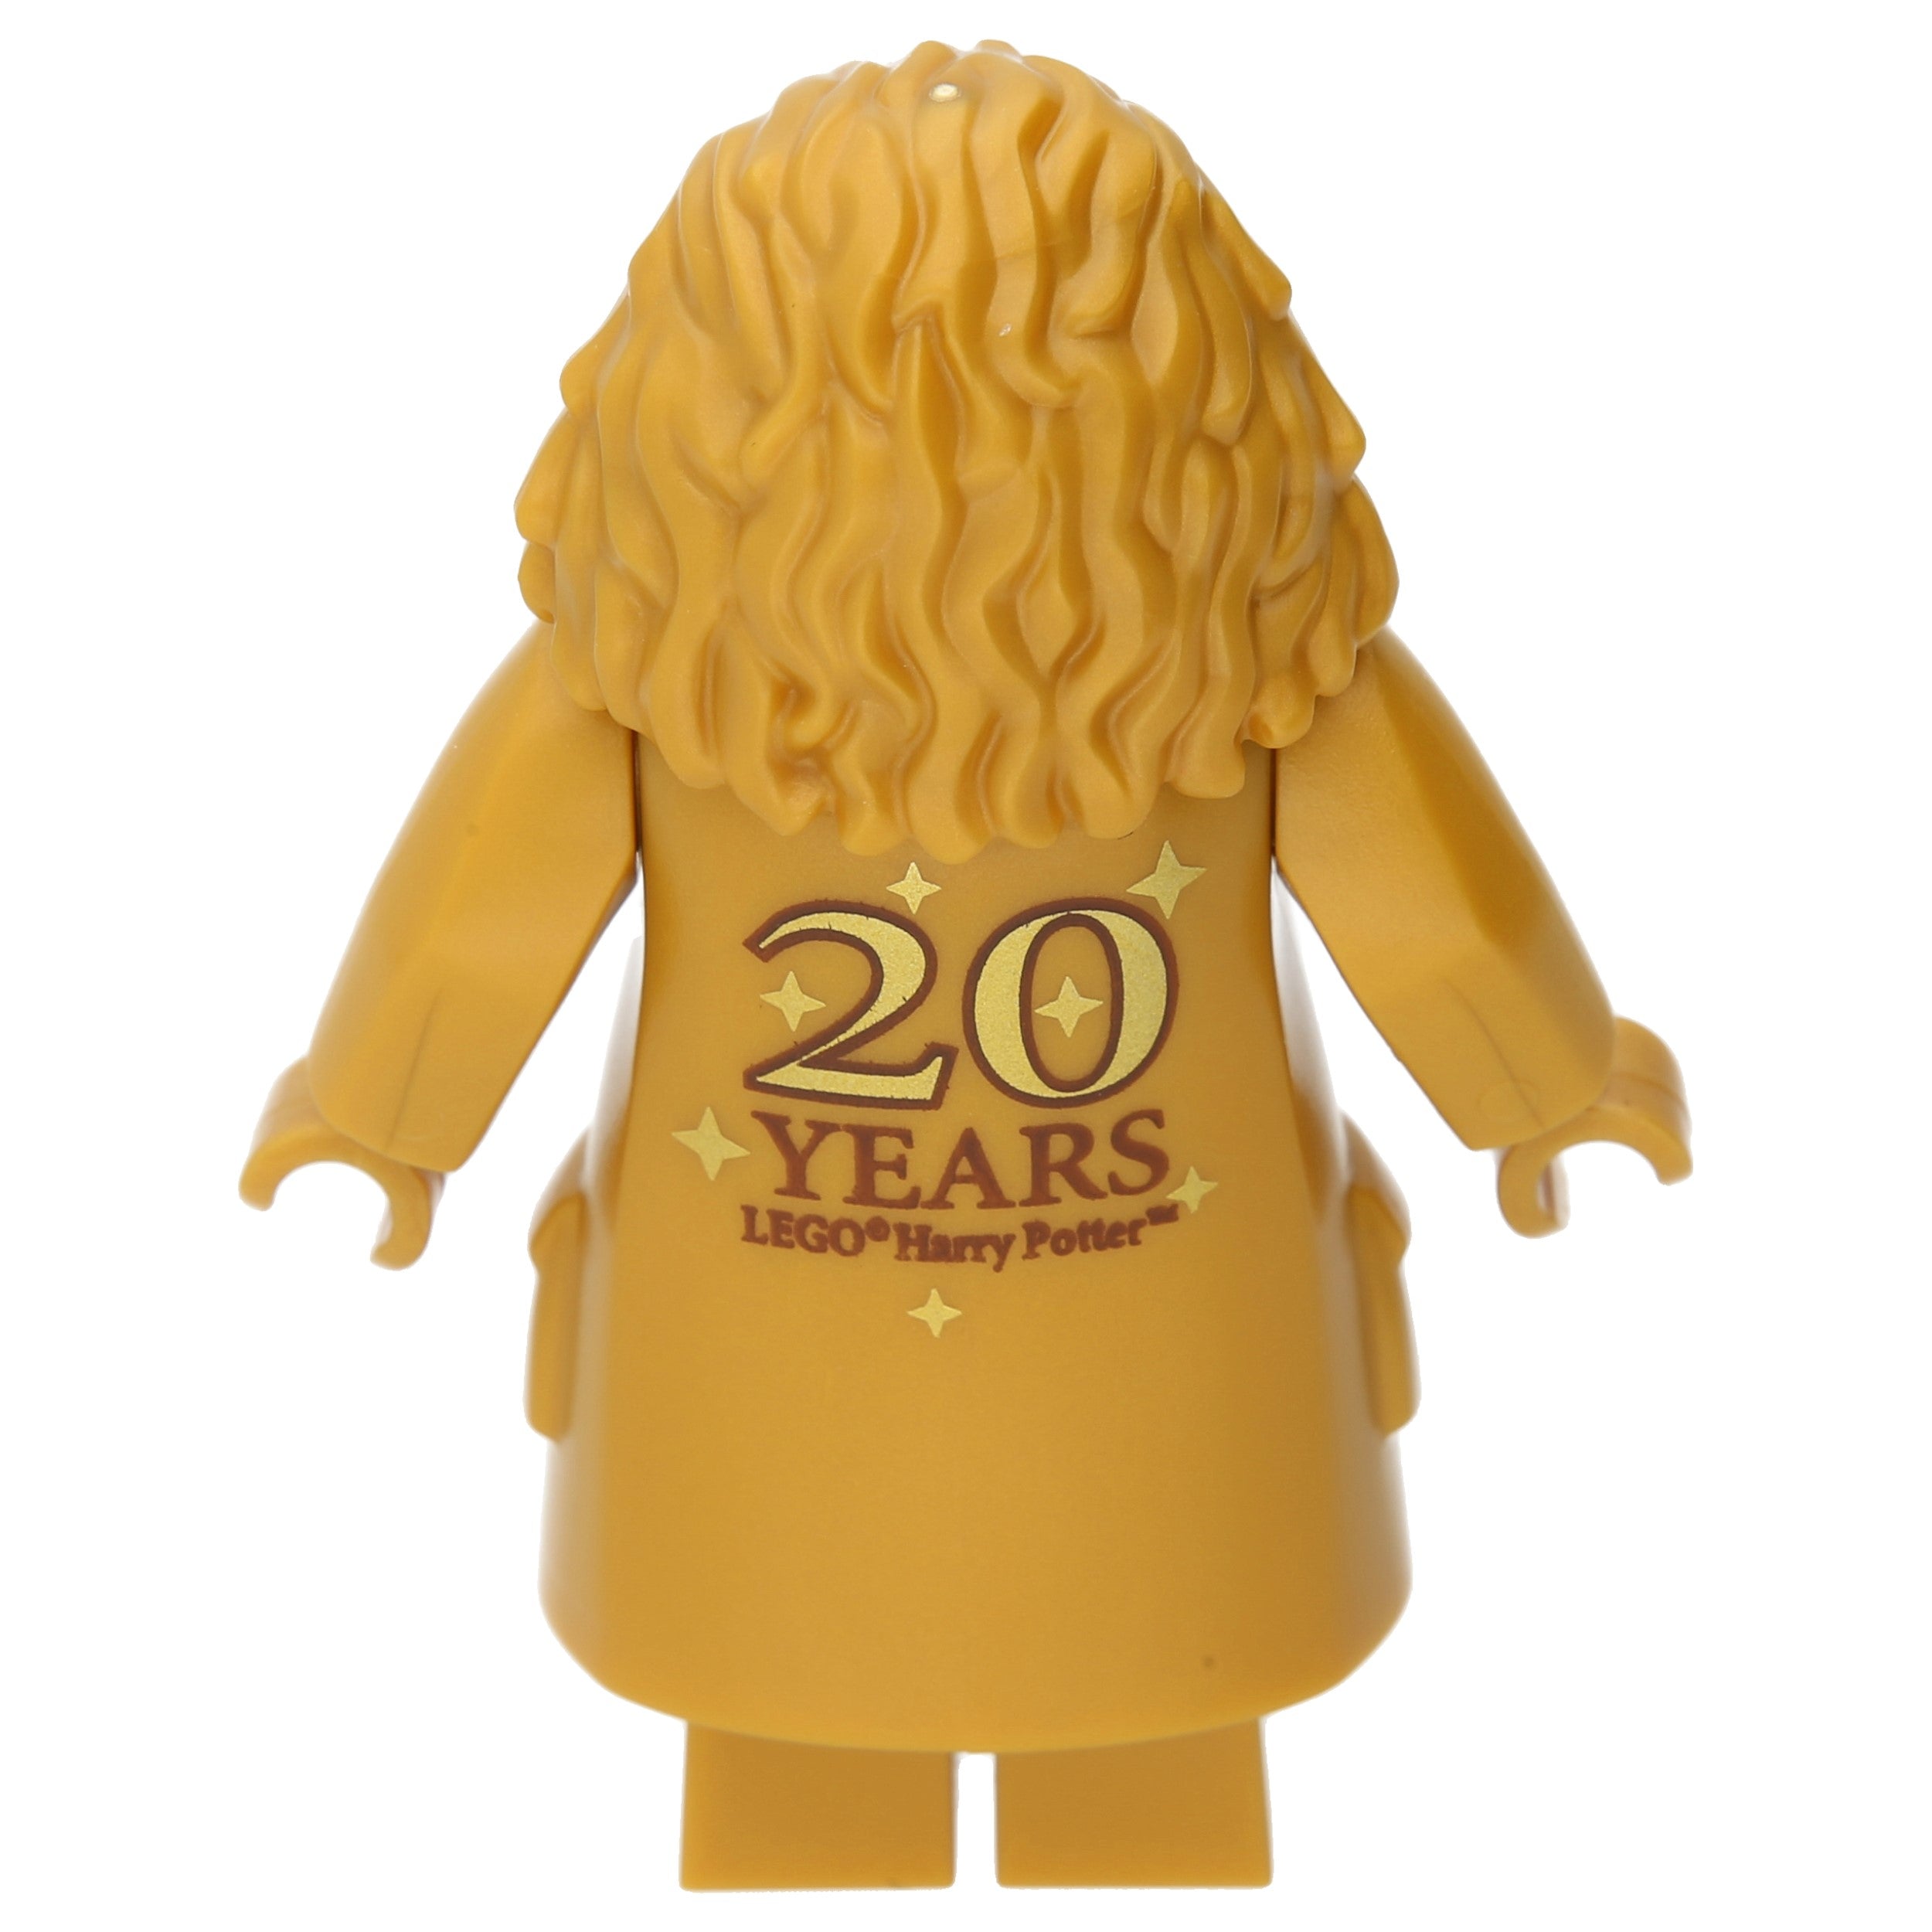 Lego Harry Potter Minifigures - Rubus Hagrid in Gold (20th anniversary)